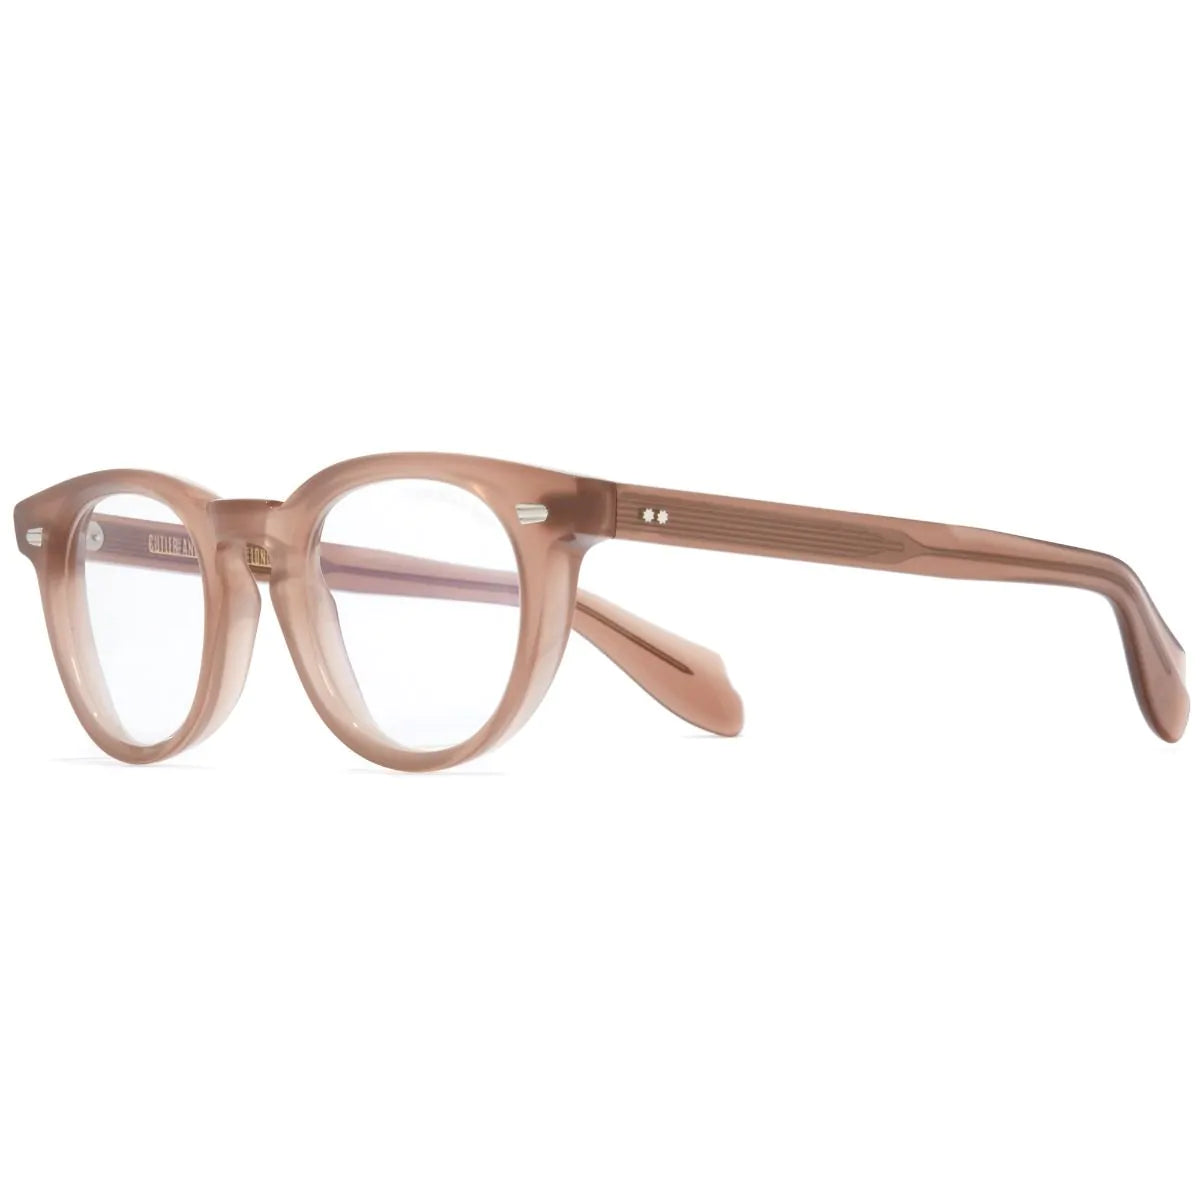 1405 Round Optical Glasses-Humble Potato by Cutler and Gross